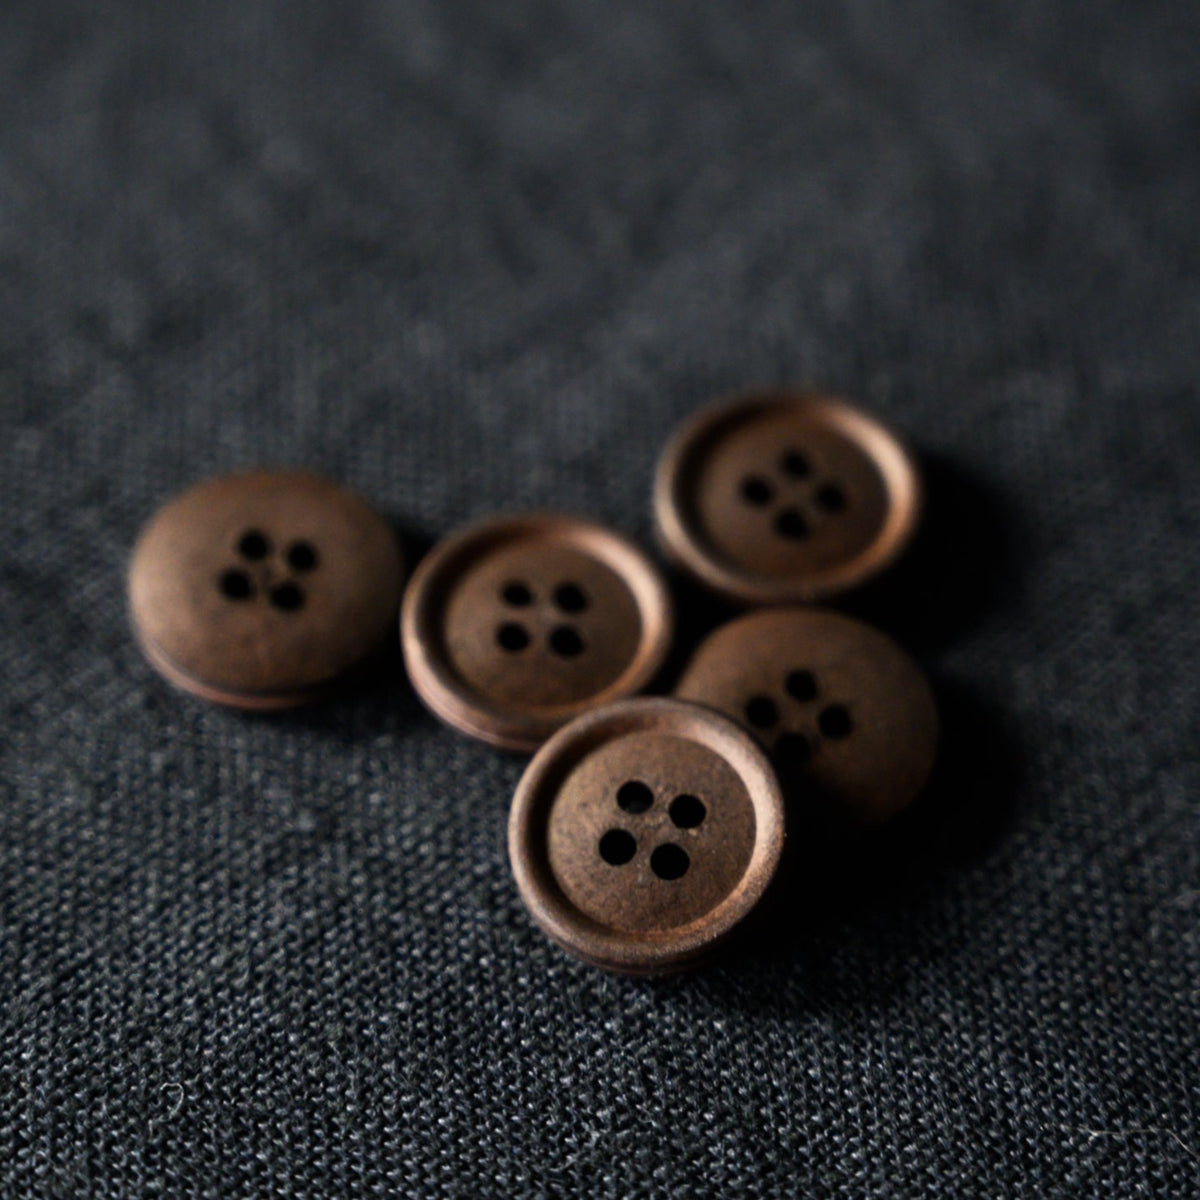 Cotton Button 15mm in Black Coffee by Merchant and Mills Dressmaking Fabric Stitch Piece Loop Australia